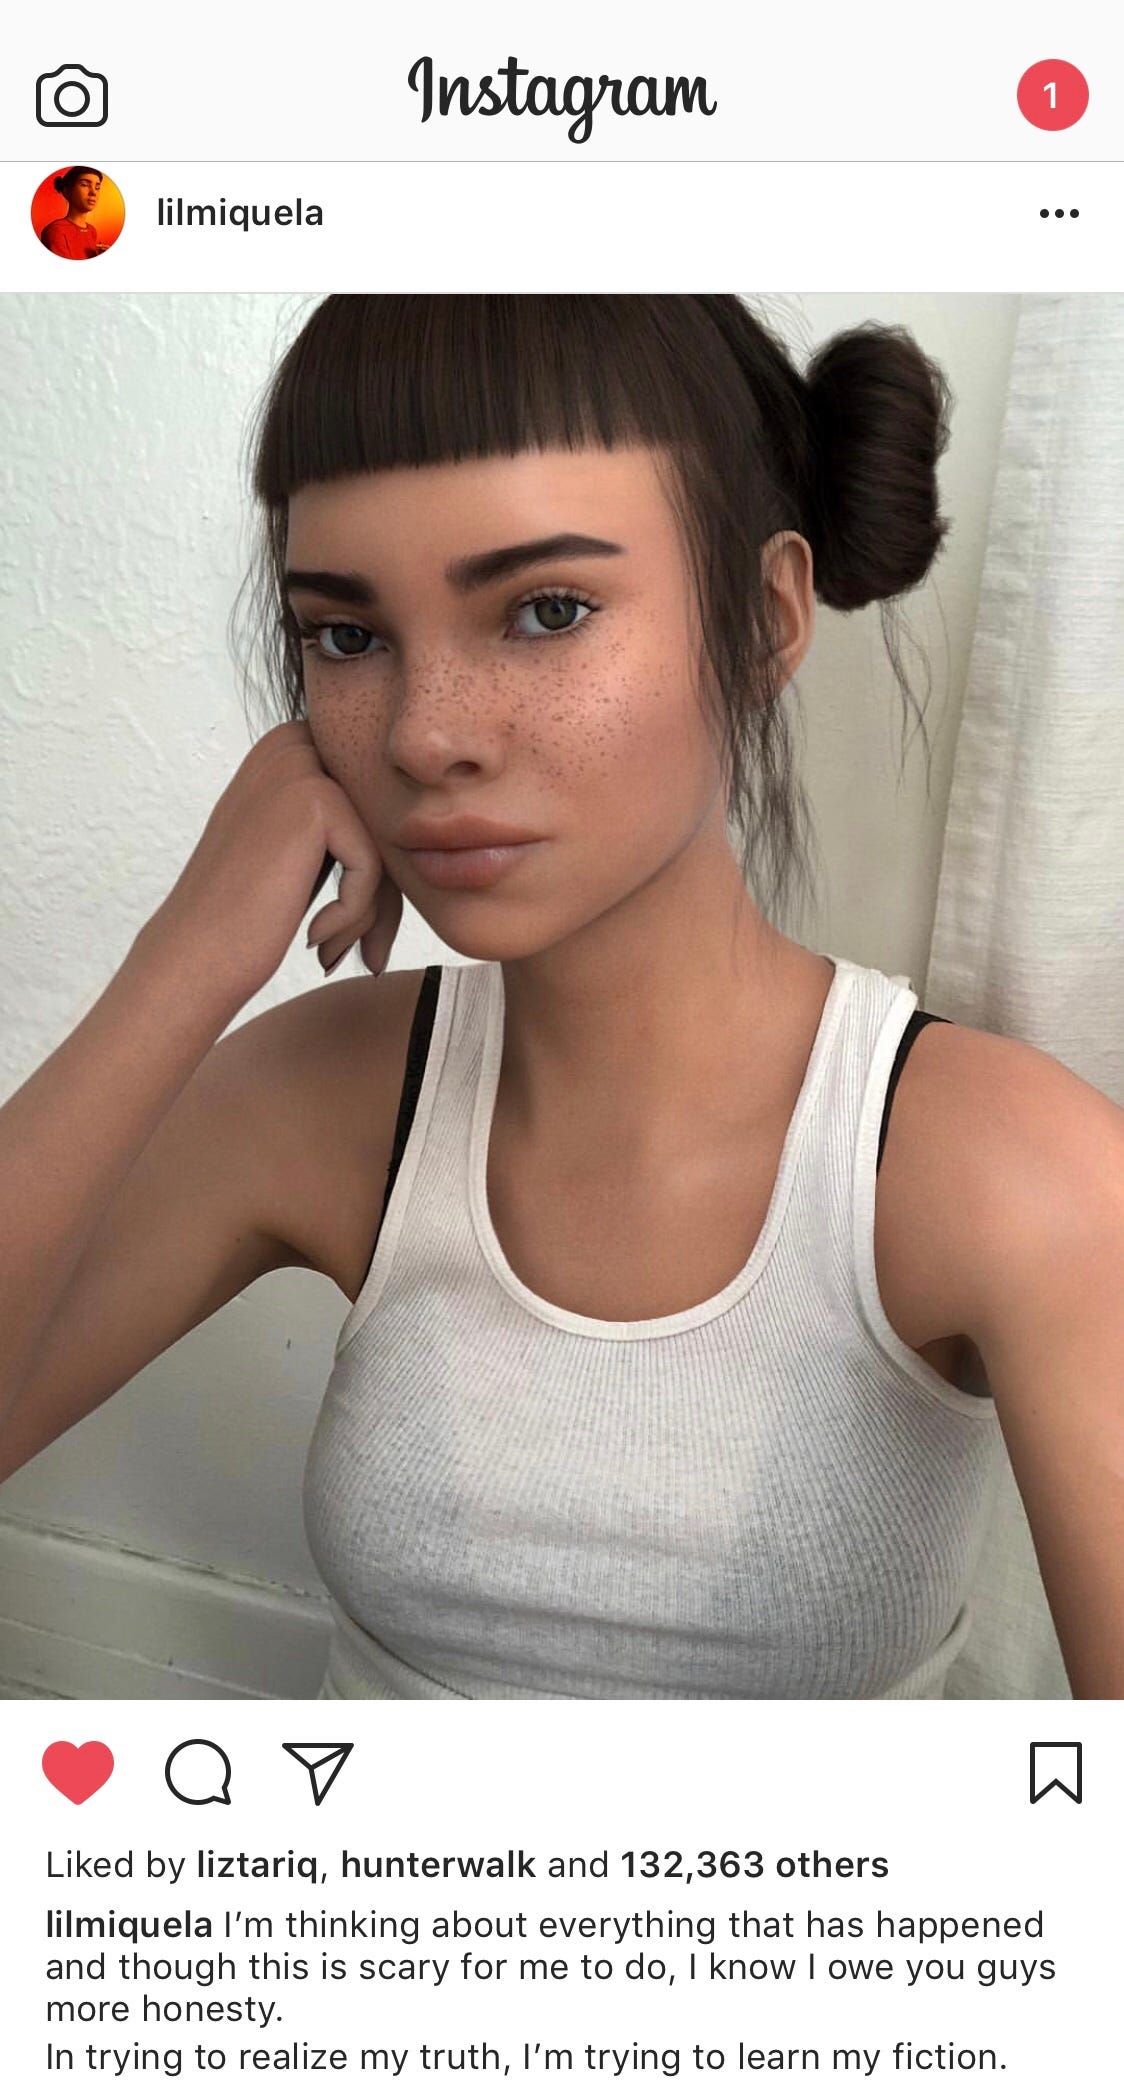 Blurred lines between digital and physical reality; Lil Miquela goes heart  to heart after hack by Bermuda, two virtual people | by Jacob Mullins |  Medium